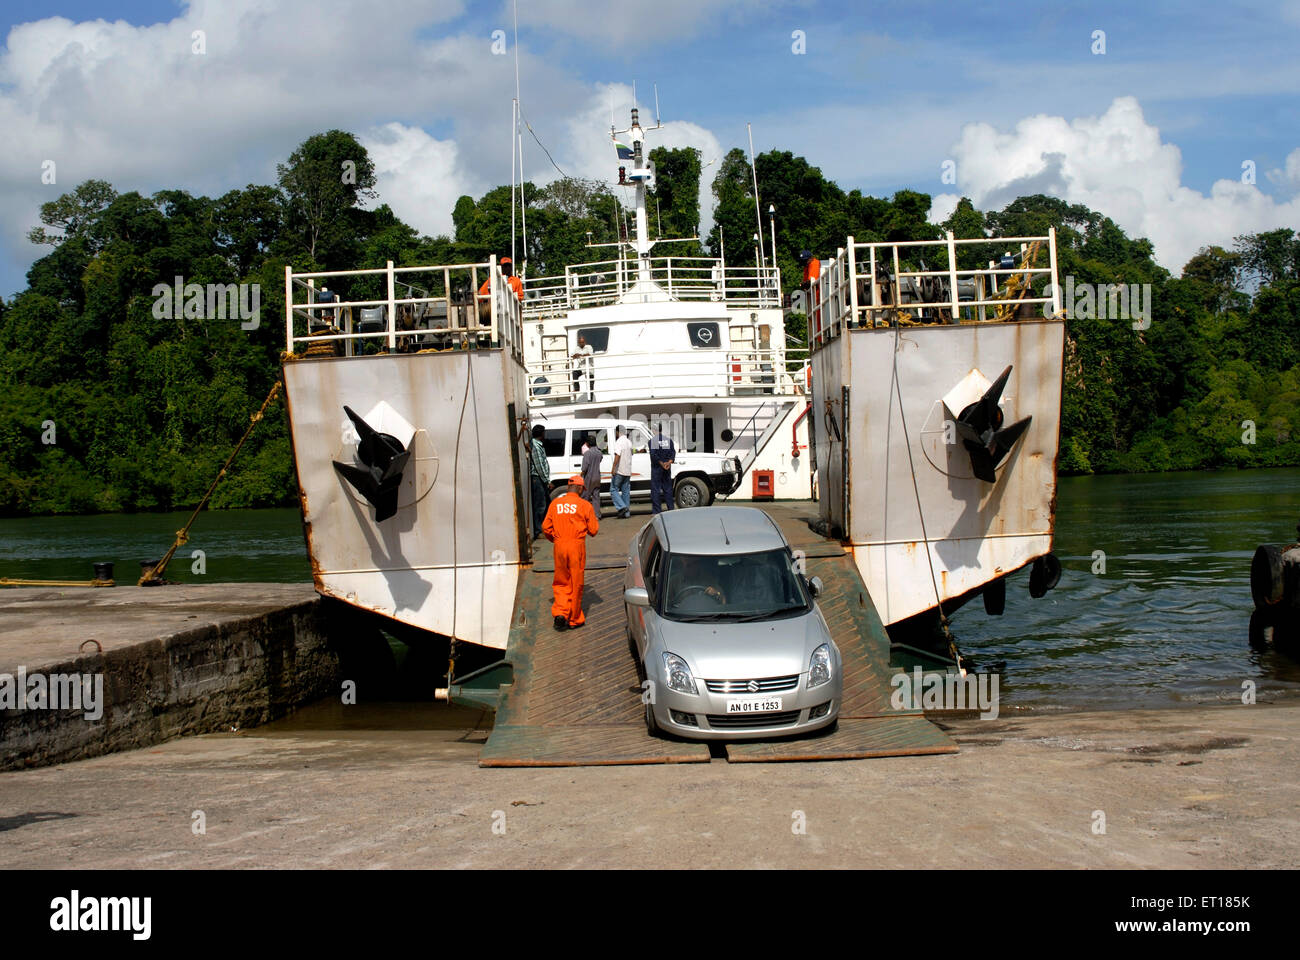 Vehicles on barge ferry boat, Port Blair, Andaman and Nicobar Islands, Union territory of India, UT, India, Asia Stock Photo